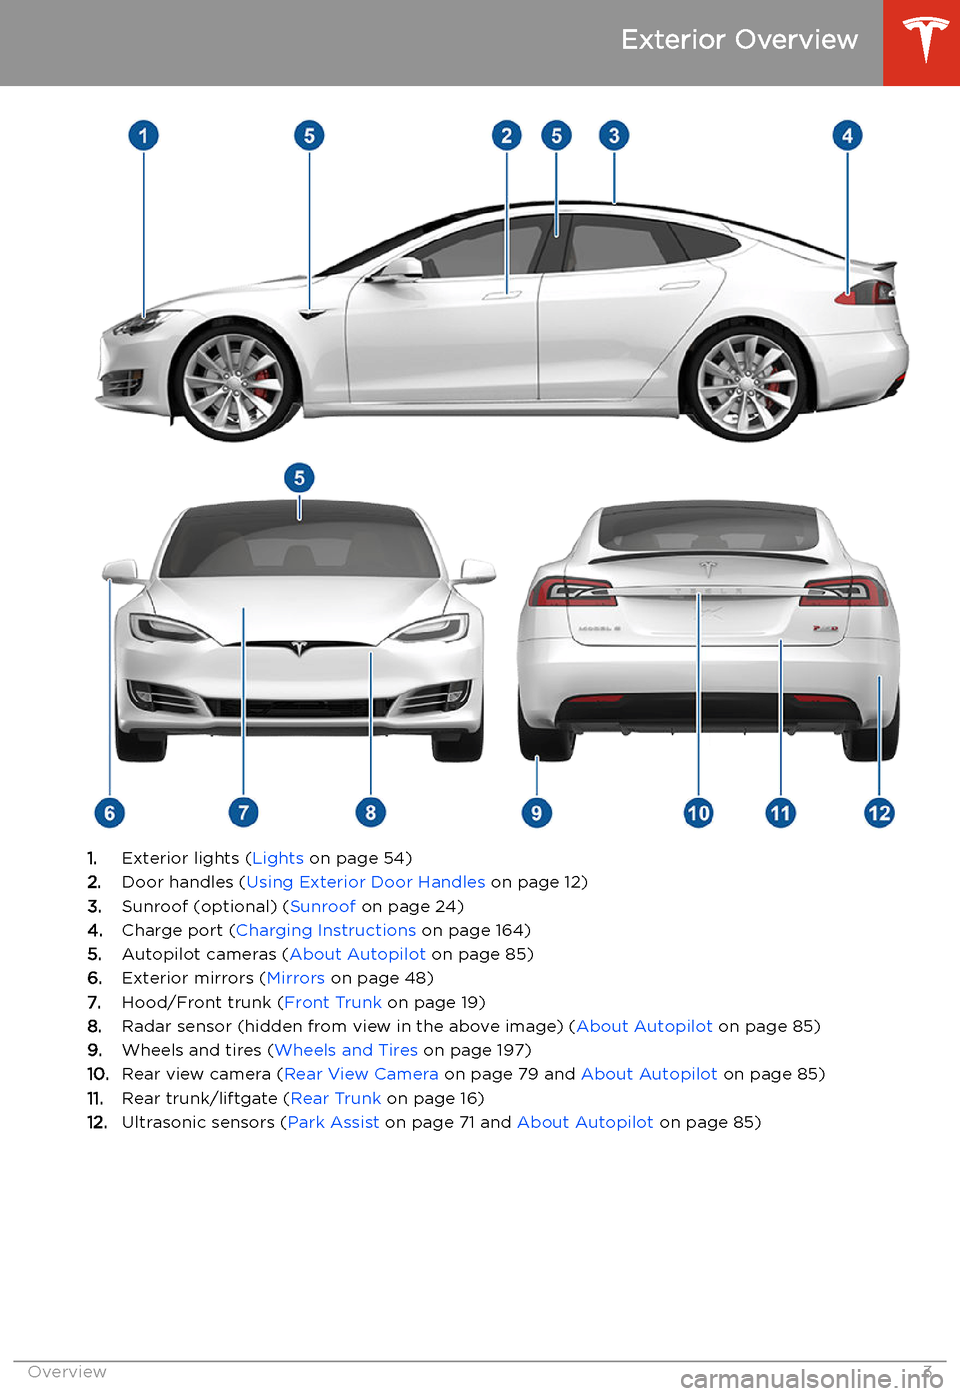 TESLA MODEL S 2020  Owners Manual Exterior Overview
1.Exterior lights ( Lights on page 54)
2. Door handles ( Using Exterior Door Handles  on page 12)
3. Sunroof (optional) ( Sunroof on page 24)
4. Charge port ( Charging Instructions  